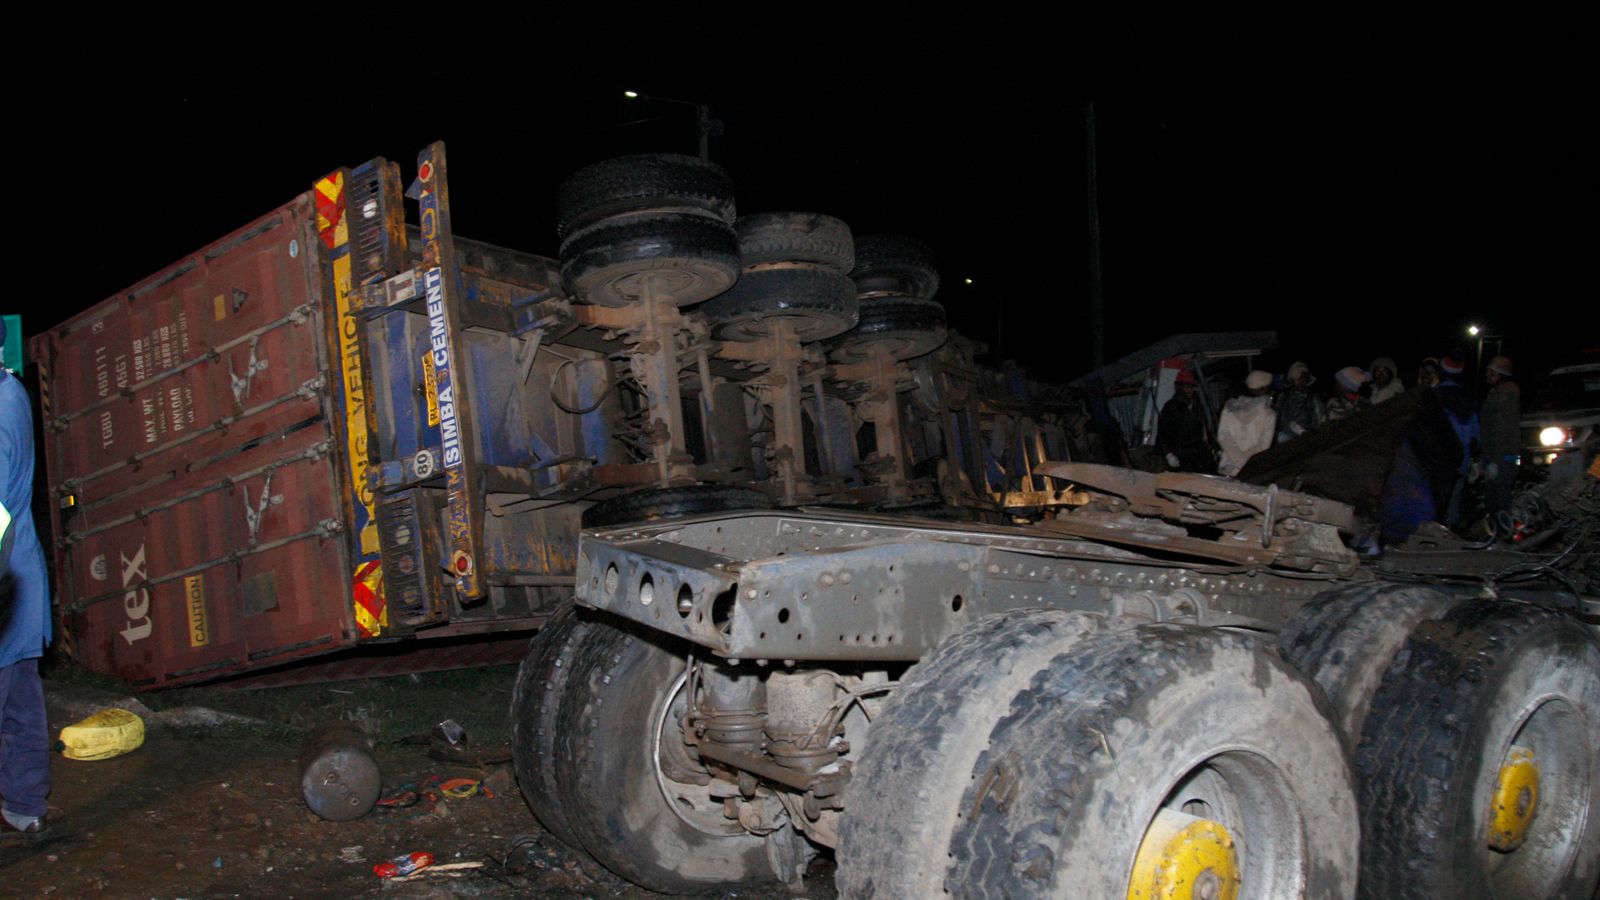 Kenya: At least 51 people dead after truck crashes into market traders